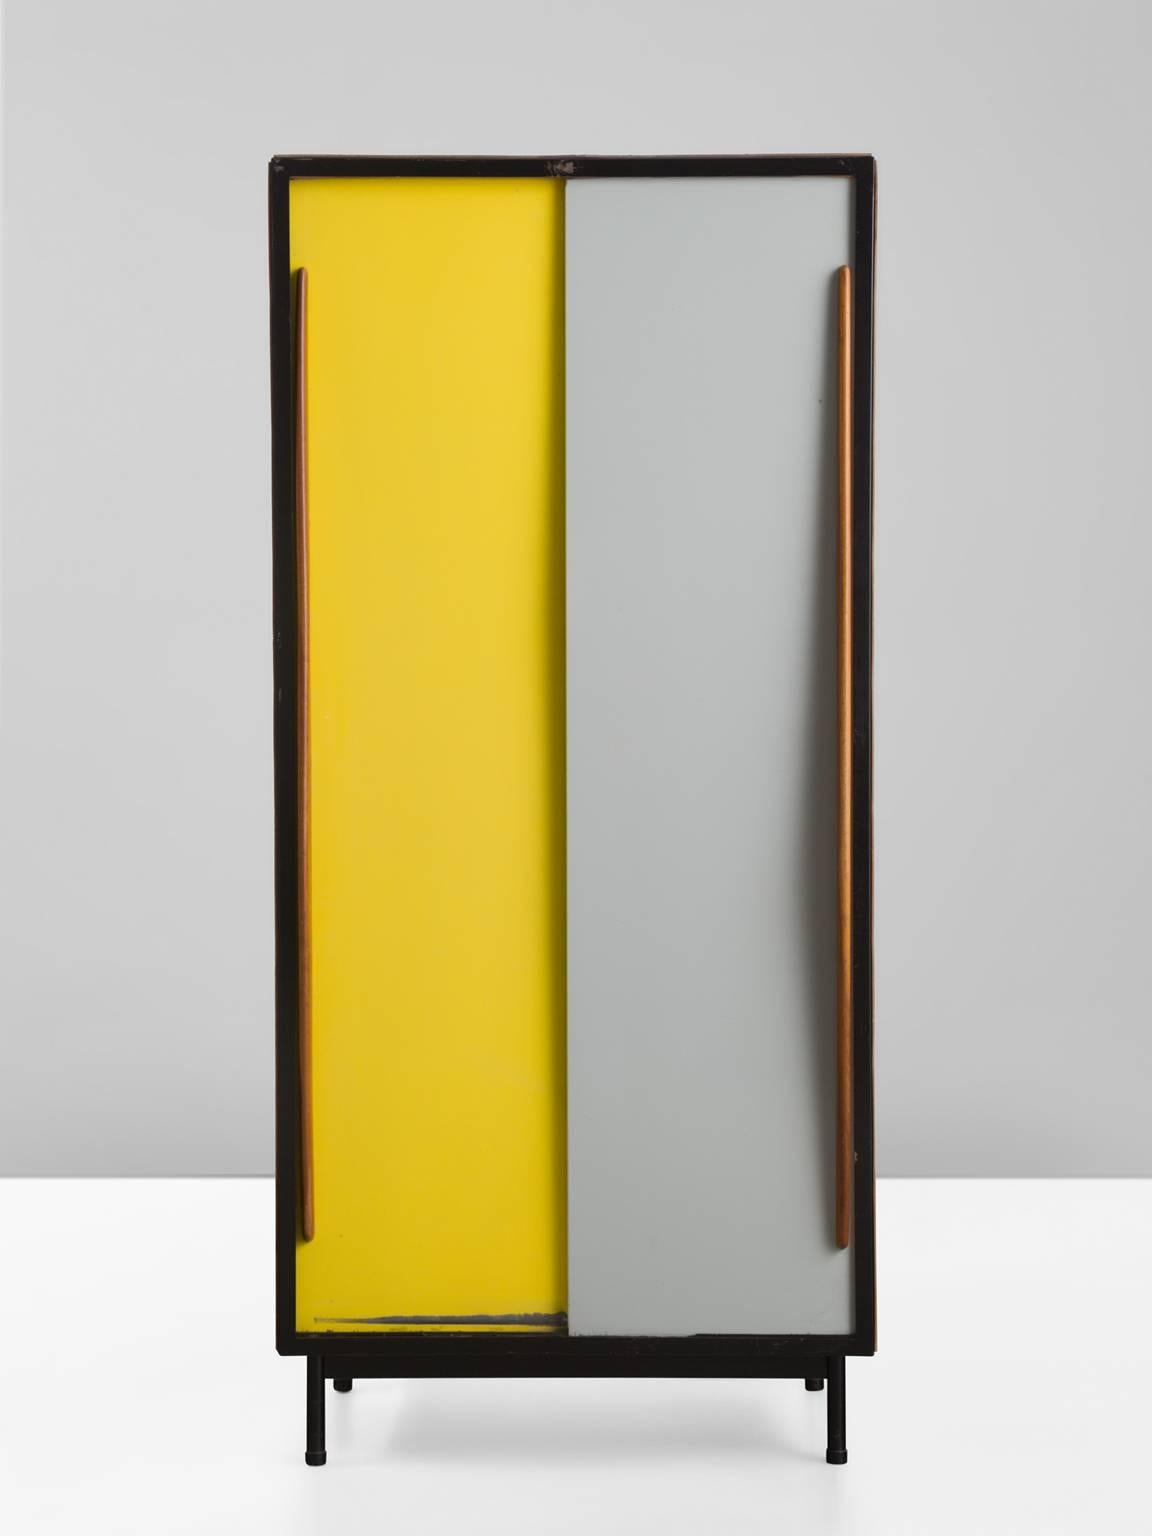 Cabinet, in wood, mahogany and metal by Willy Van Der Meeren for Tubax, Belgium, 1952. 

Nice early example of Industrial Design from the Belgium modernist stream, designed by Willy Van Der Meeren. Originally designed for use in school buildings